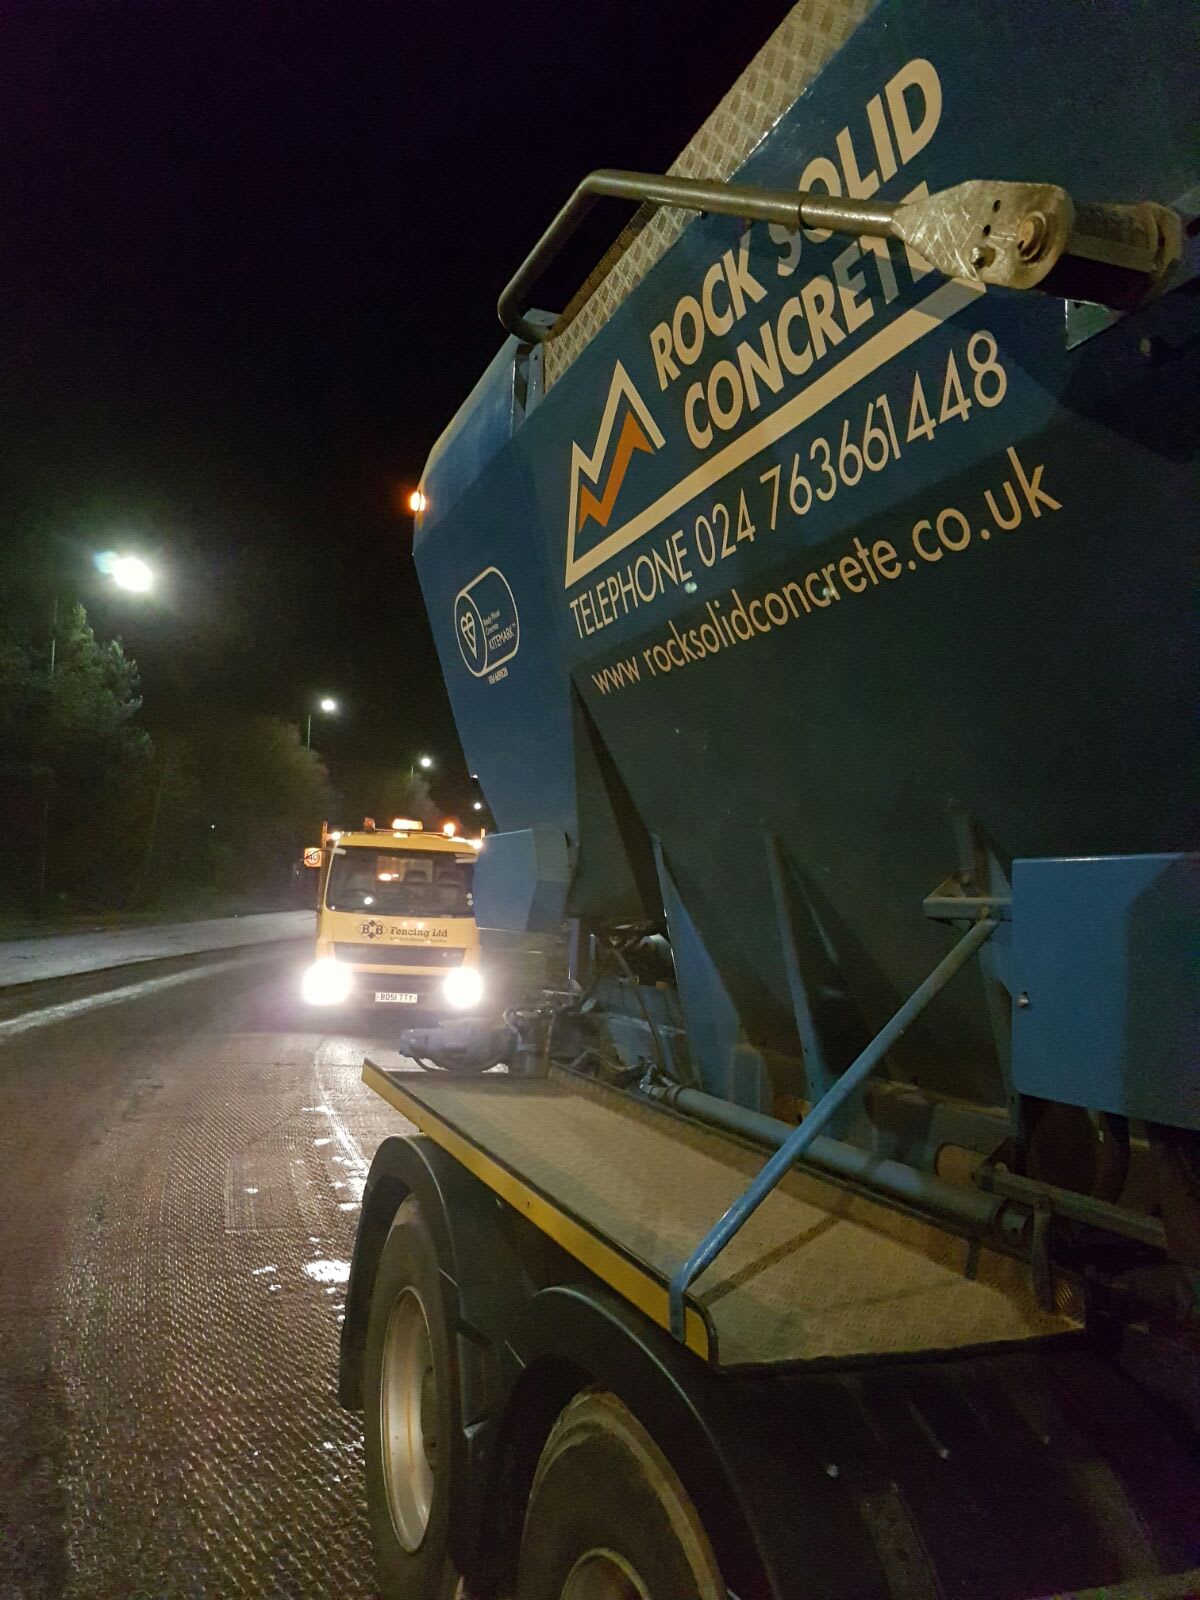 The Rock Solid Concrete Co Coventry 02476 361448